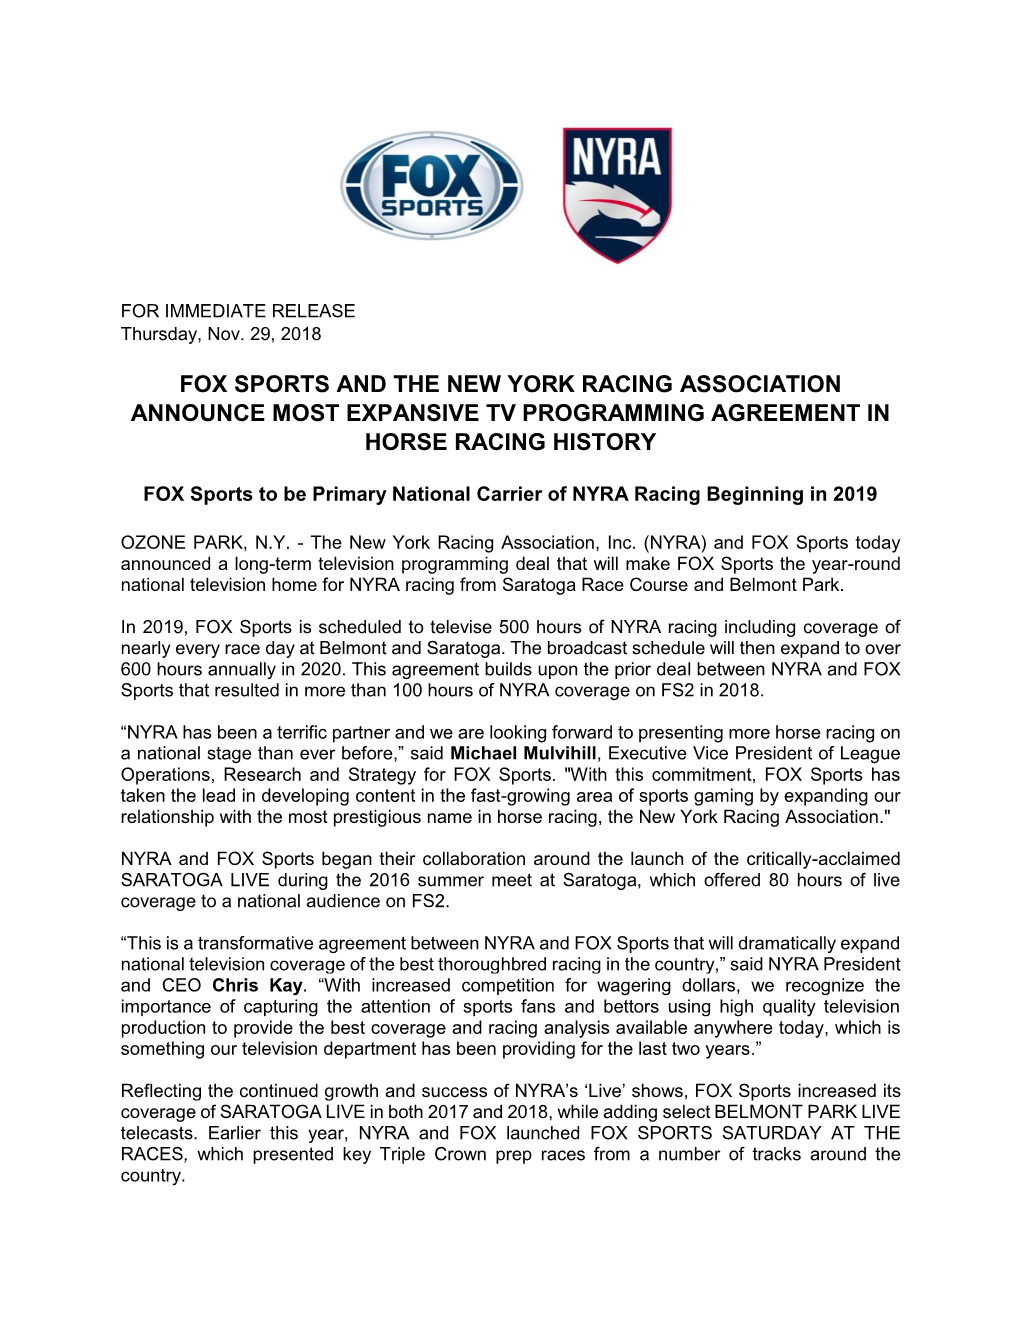 Fox Sports and the New York Racing Association Announce Most Expansive Tv Programming Agreement in Horse Racing History